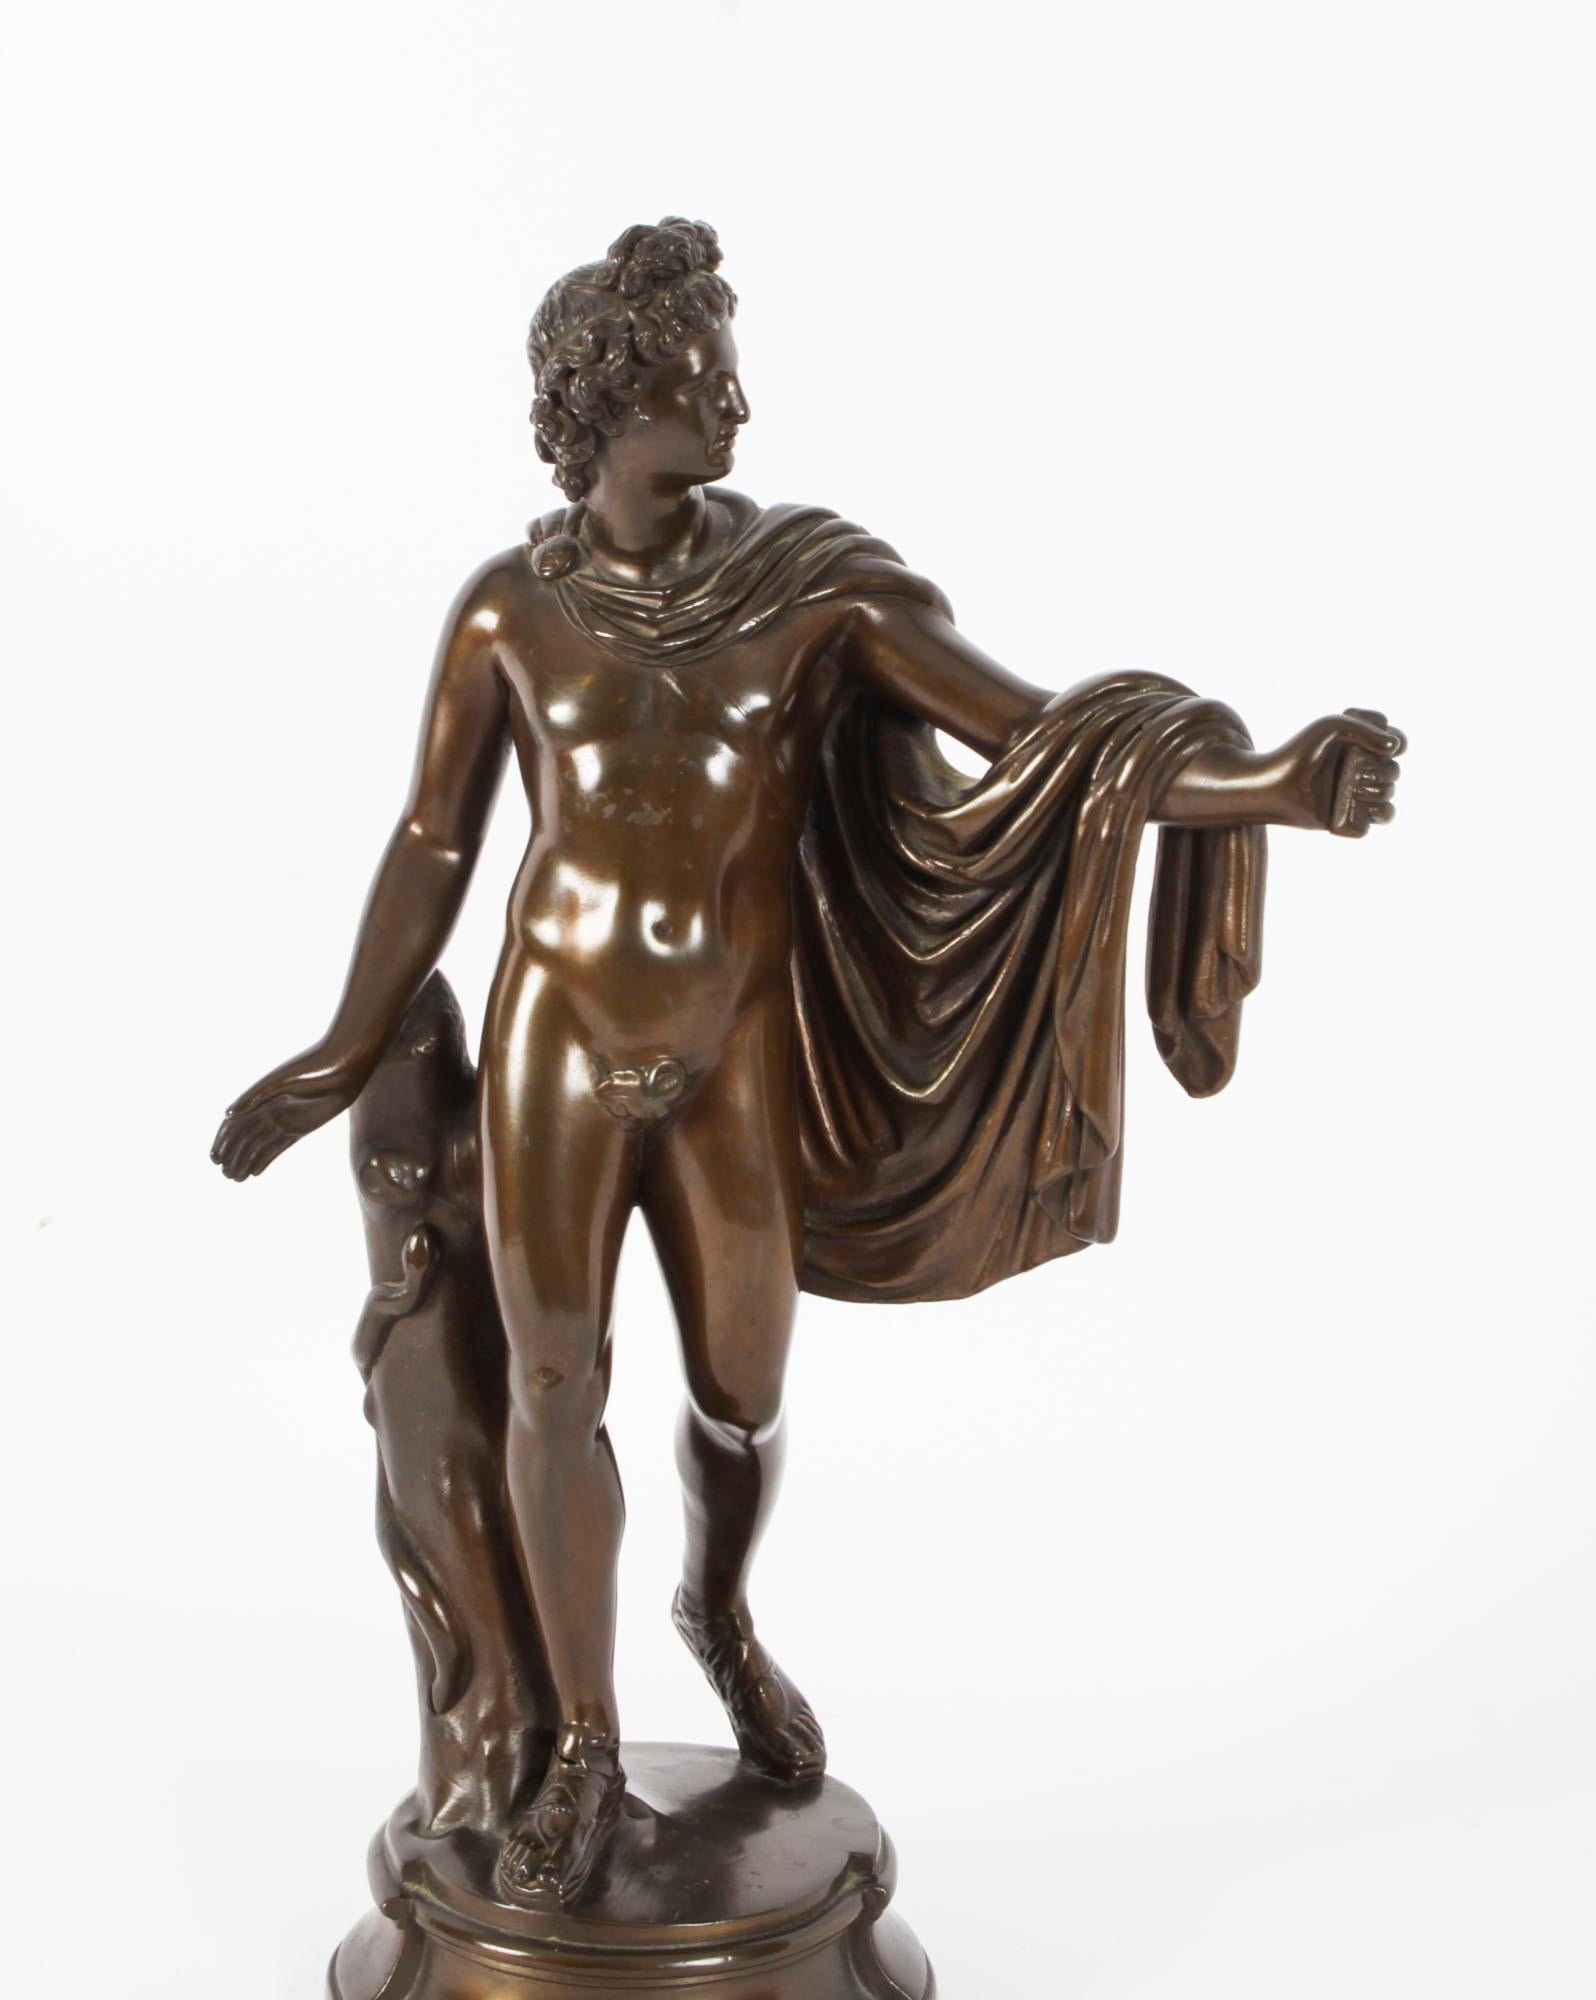 This is a truly magnificent antique Victorian patinated bronze sculpture of the famous Greek God Apollo, modelled upon a shaped circular socle, inscribed monogram 'NF' and numbered 21170 to the underside, circa 1860 in date.
 
This stunning bronze